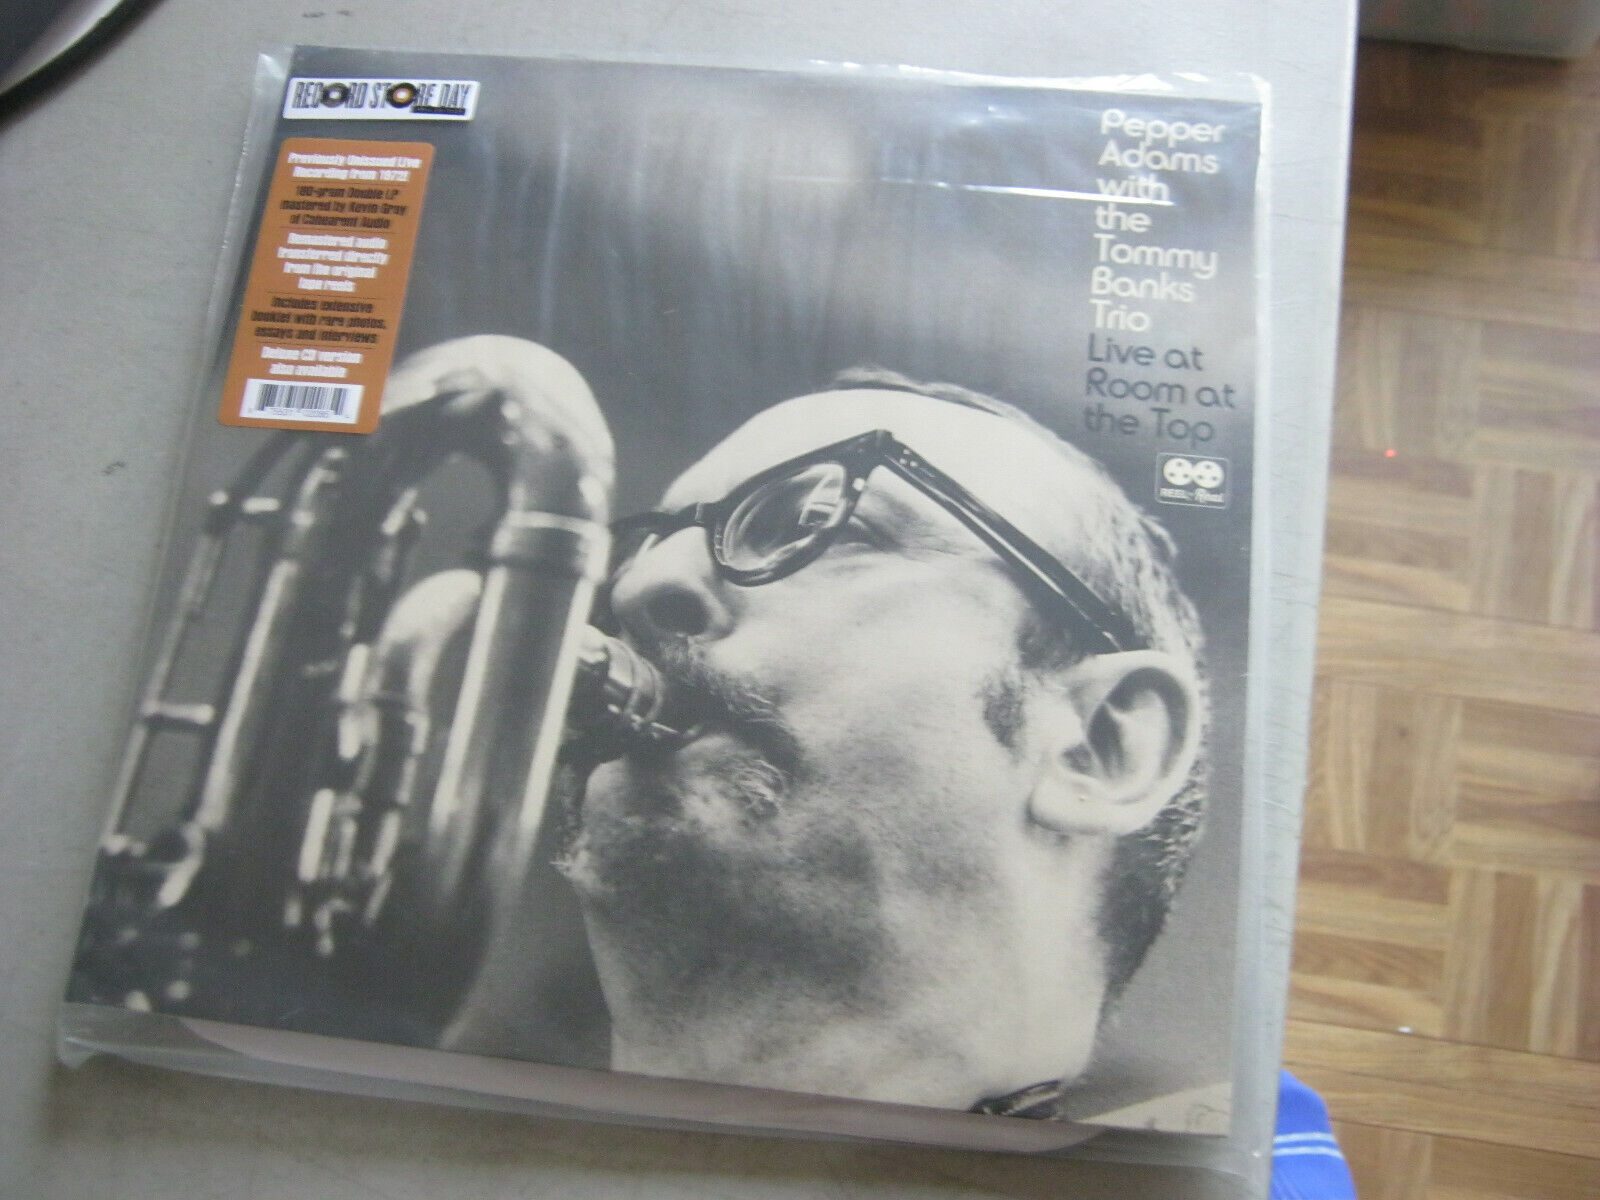 Pepper Adams with the Tommy Banks Trio Live at Room Top [NEW 2xLP] RSD 2022 lotc